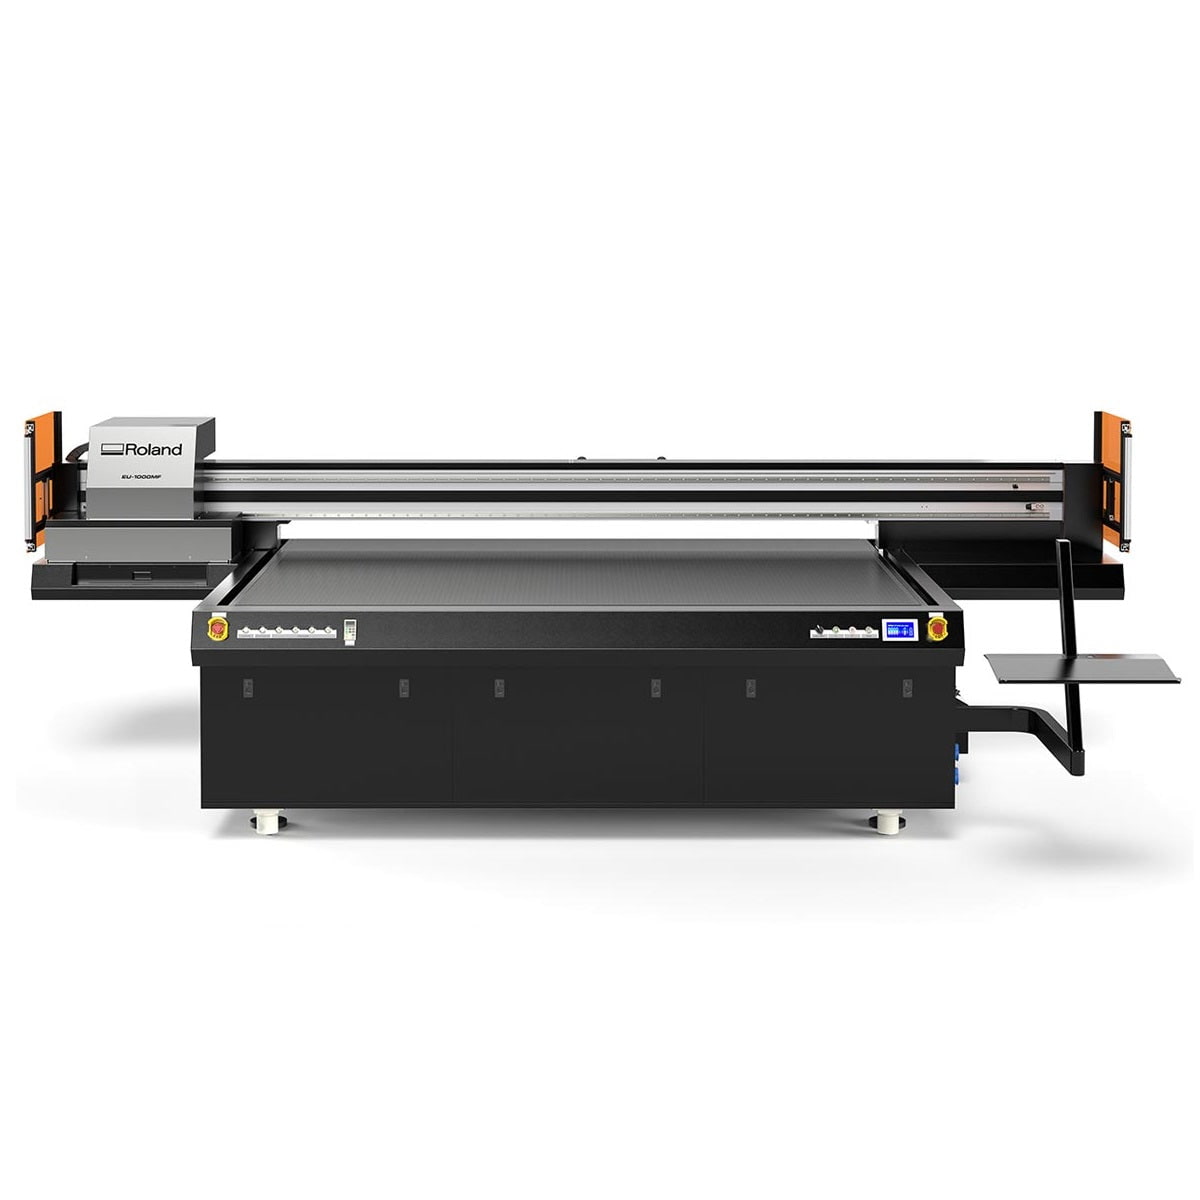 Absolute Toner Roland EU-1000MF Color Ink Large Format UV LED Flatbed Printer With Outstanding Price-Performance Other Machines